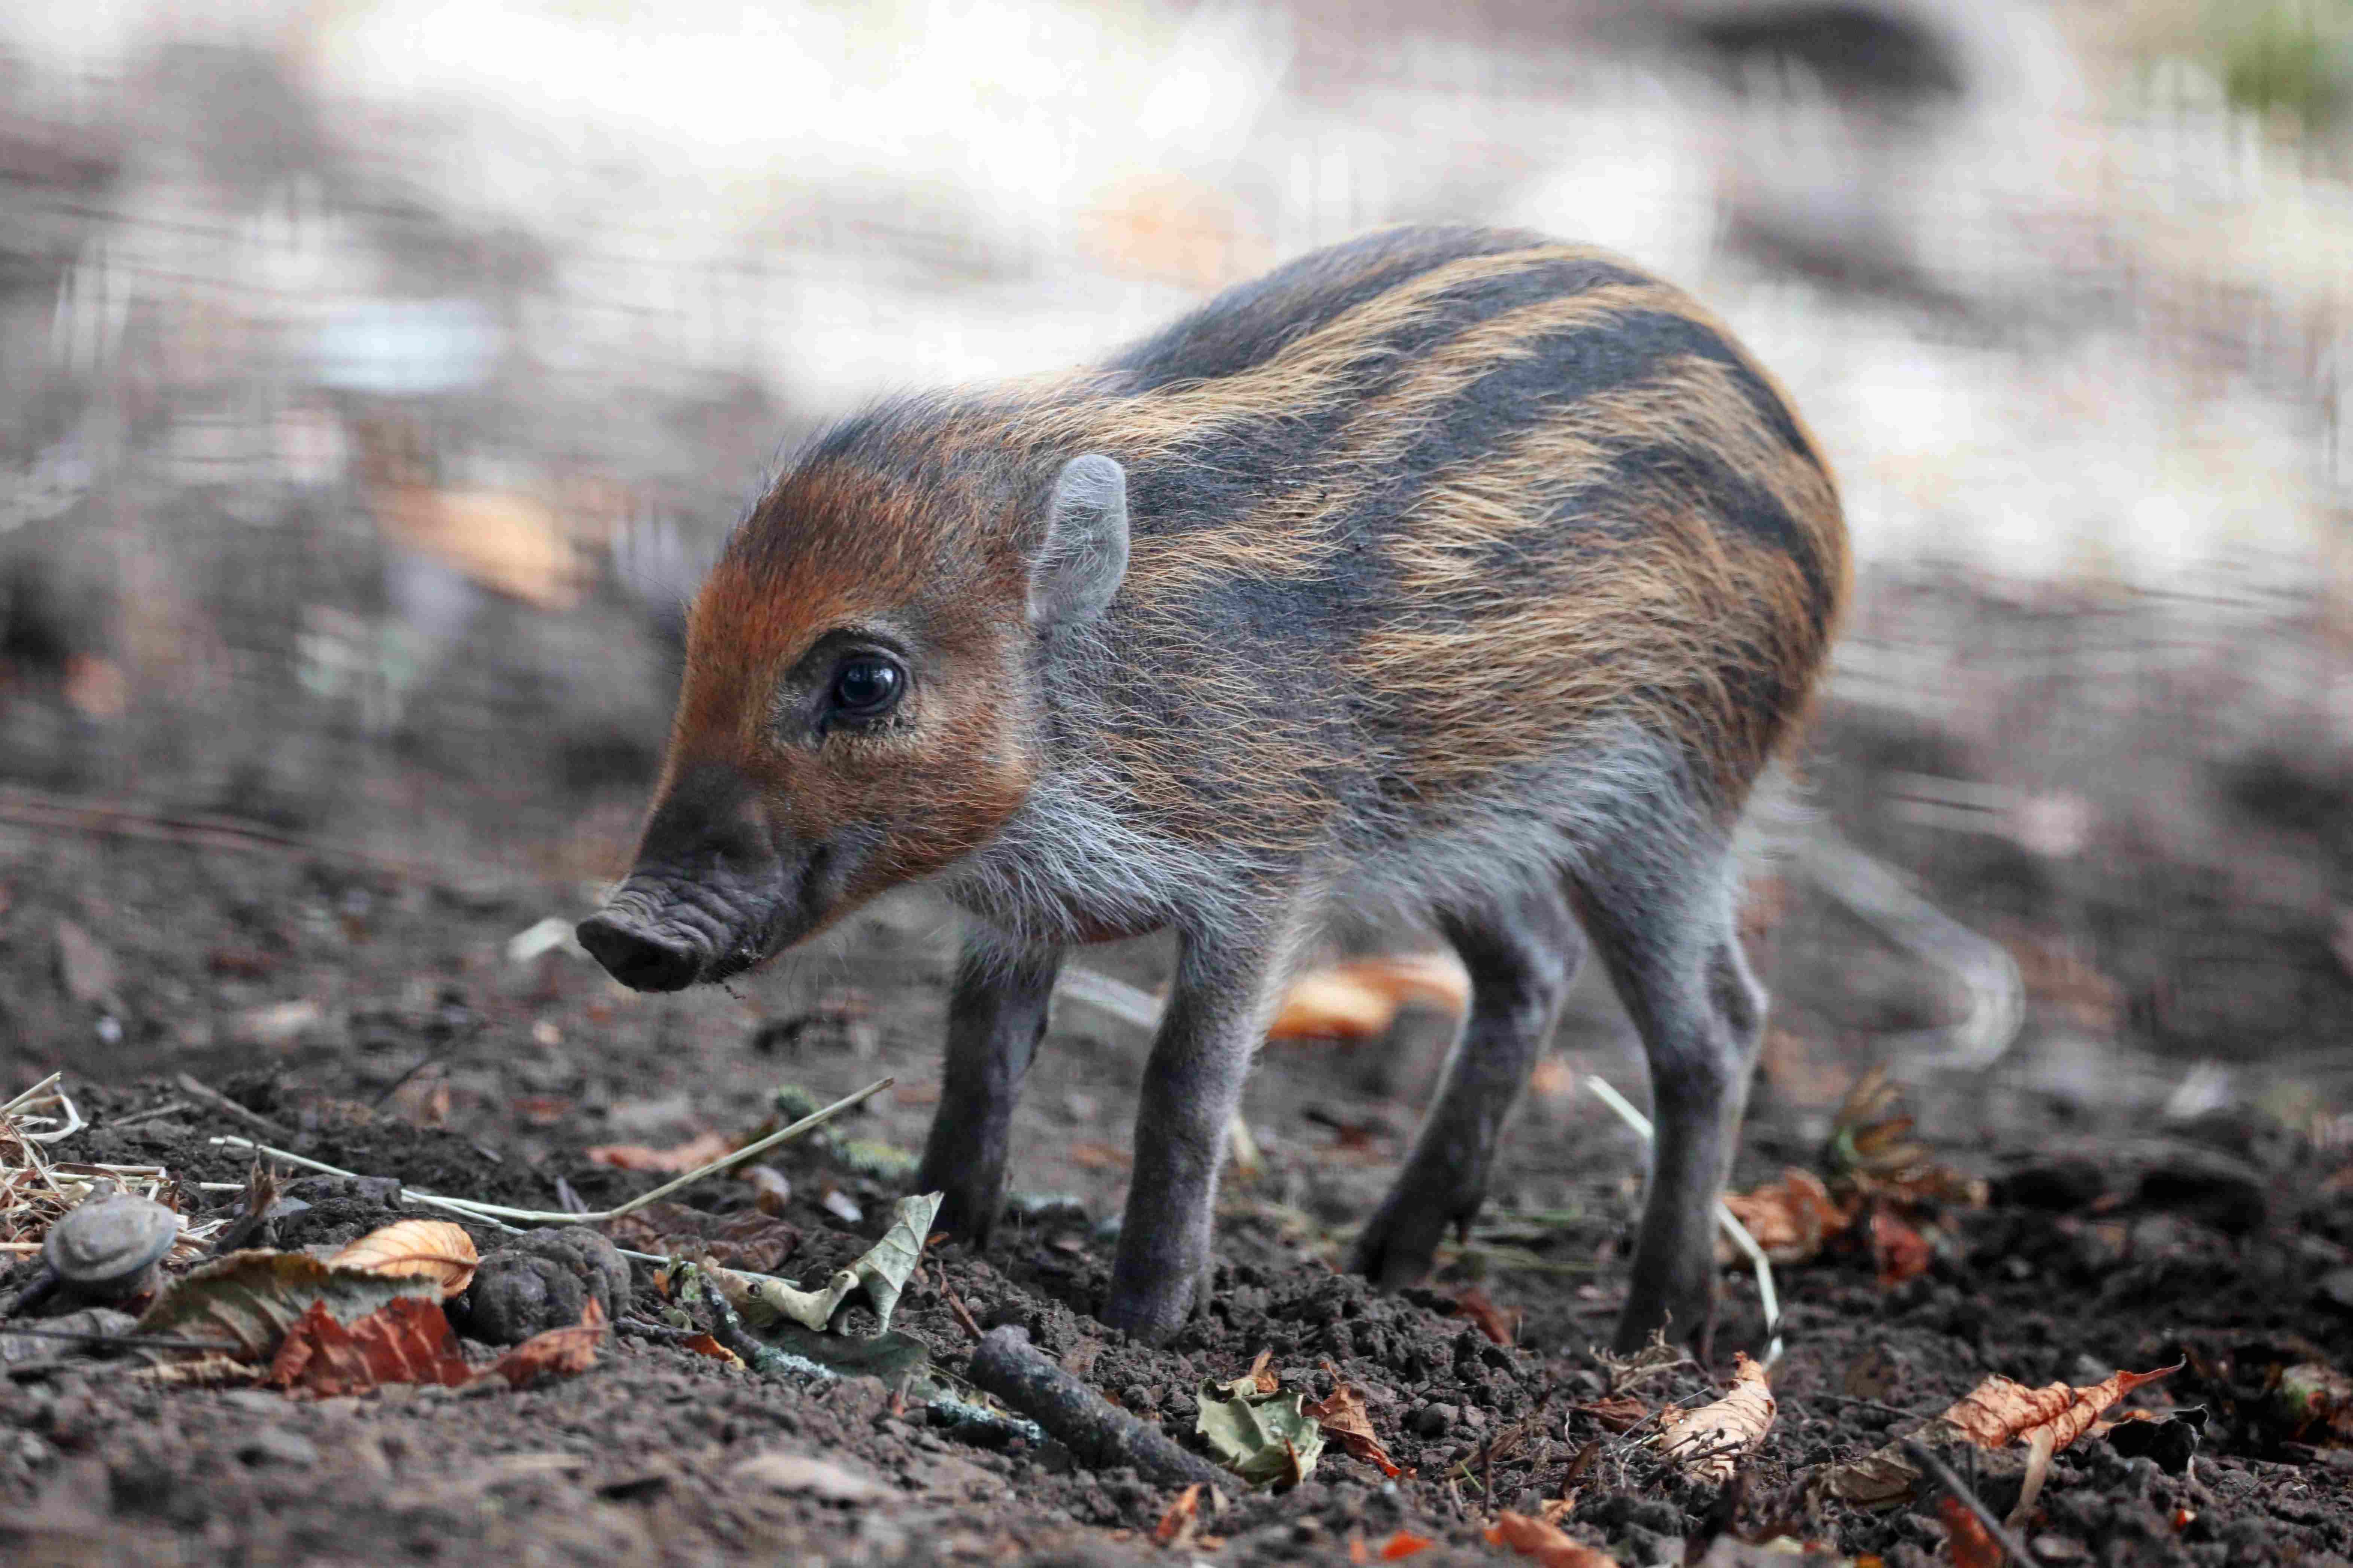 Visayan warty piglet first time outside in enclosure

Image: AMY MIDDLETON 2023